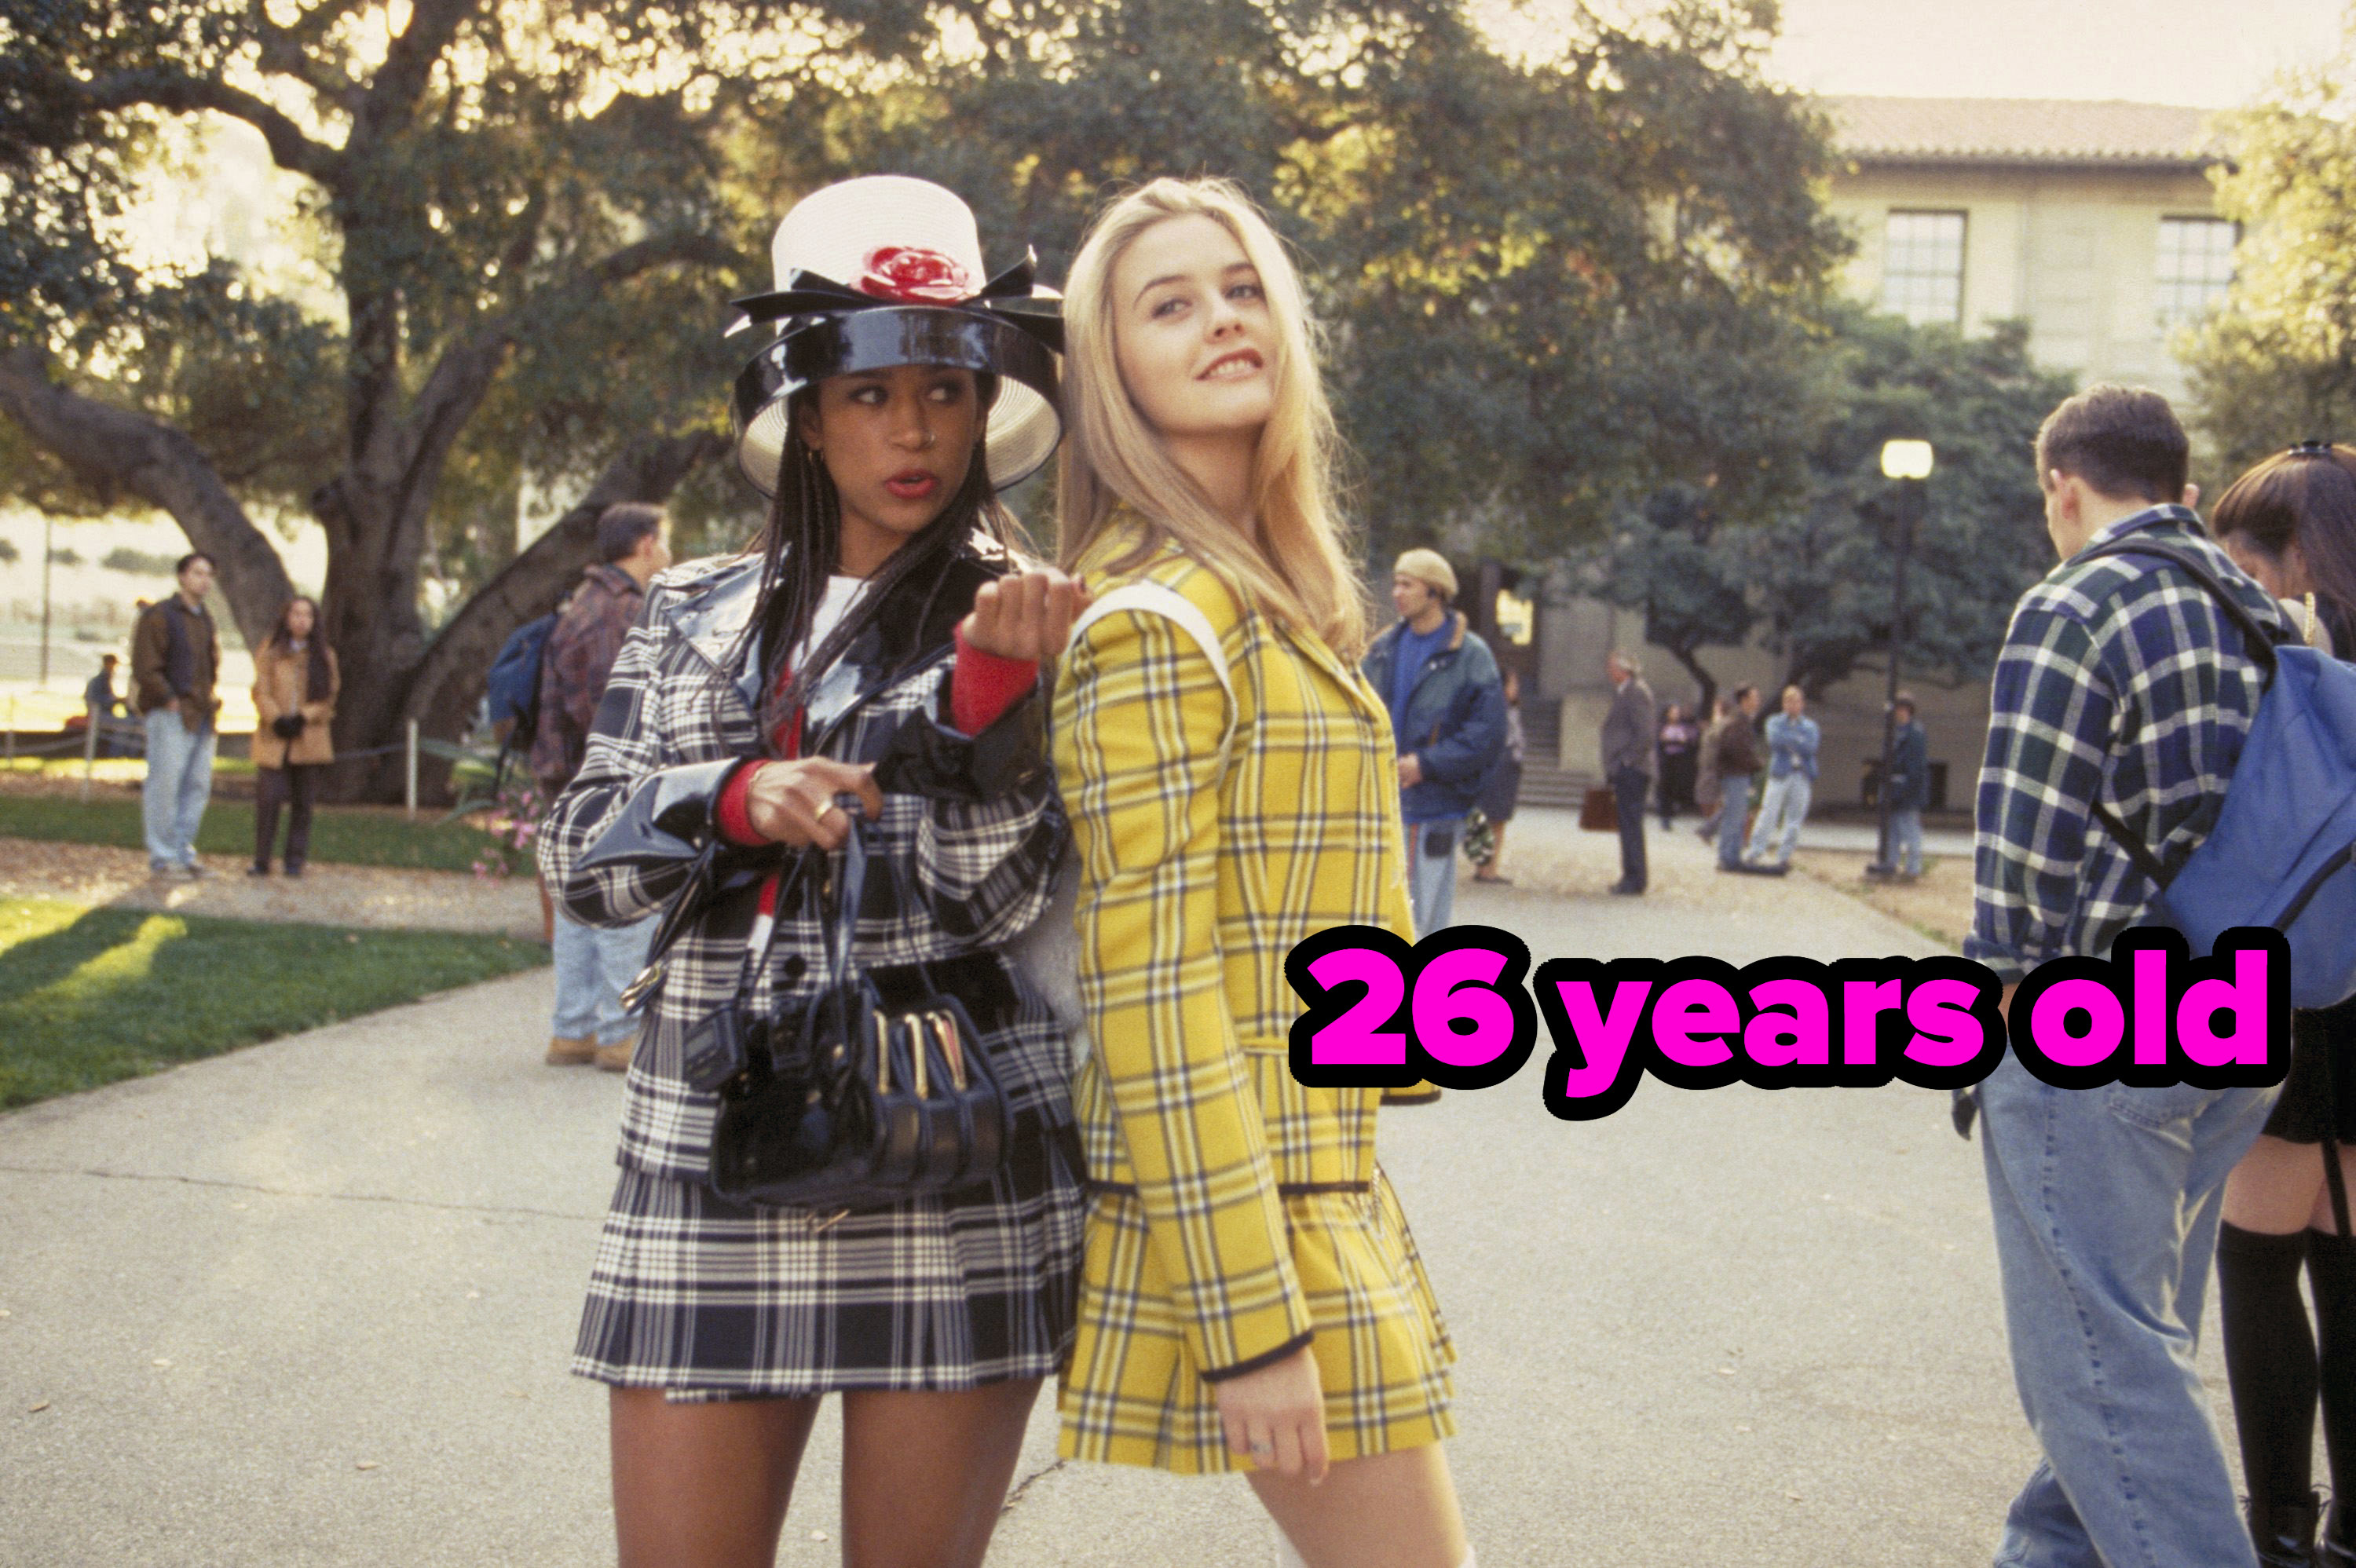 Dionne and Cher from Clueless